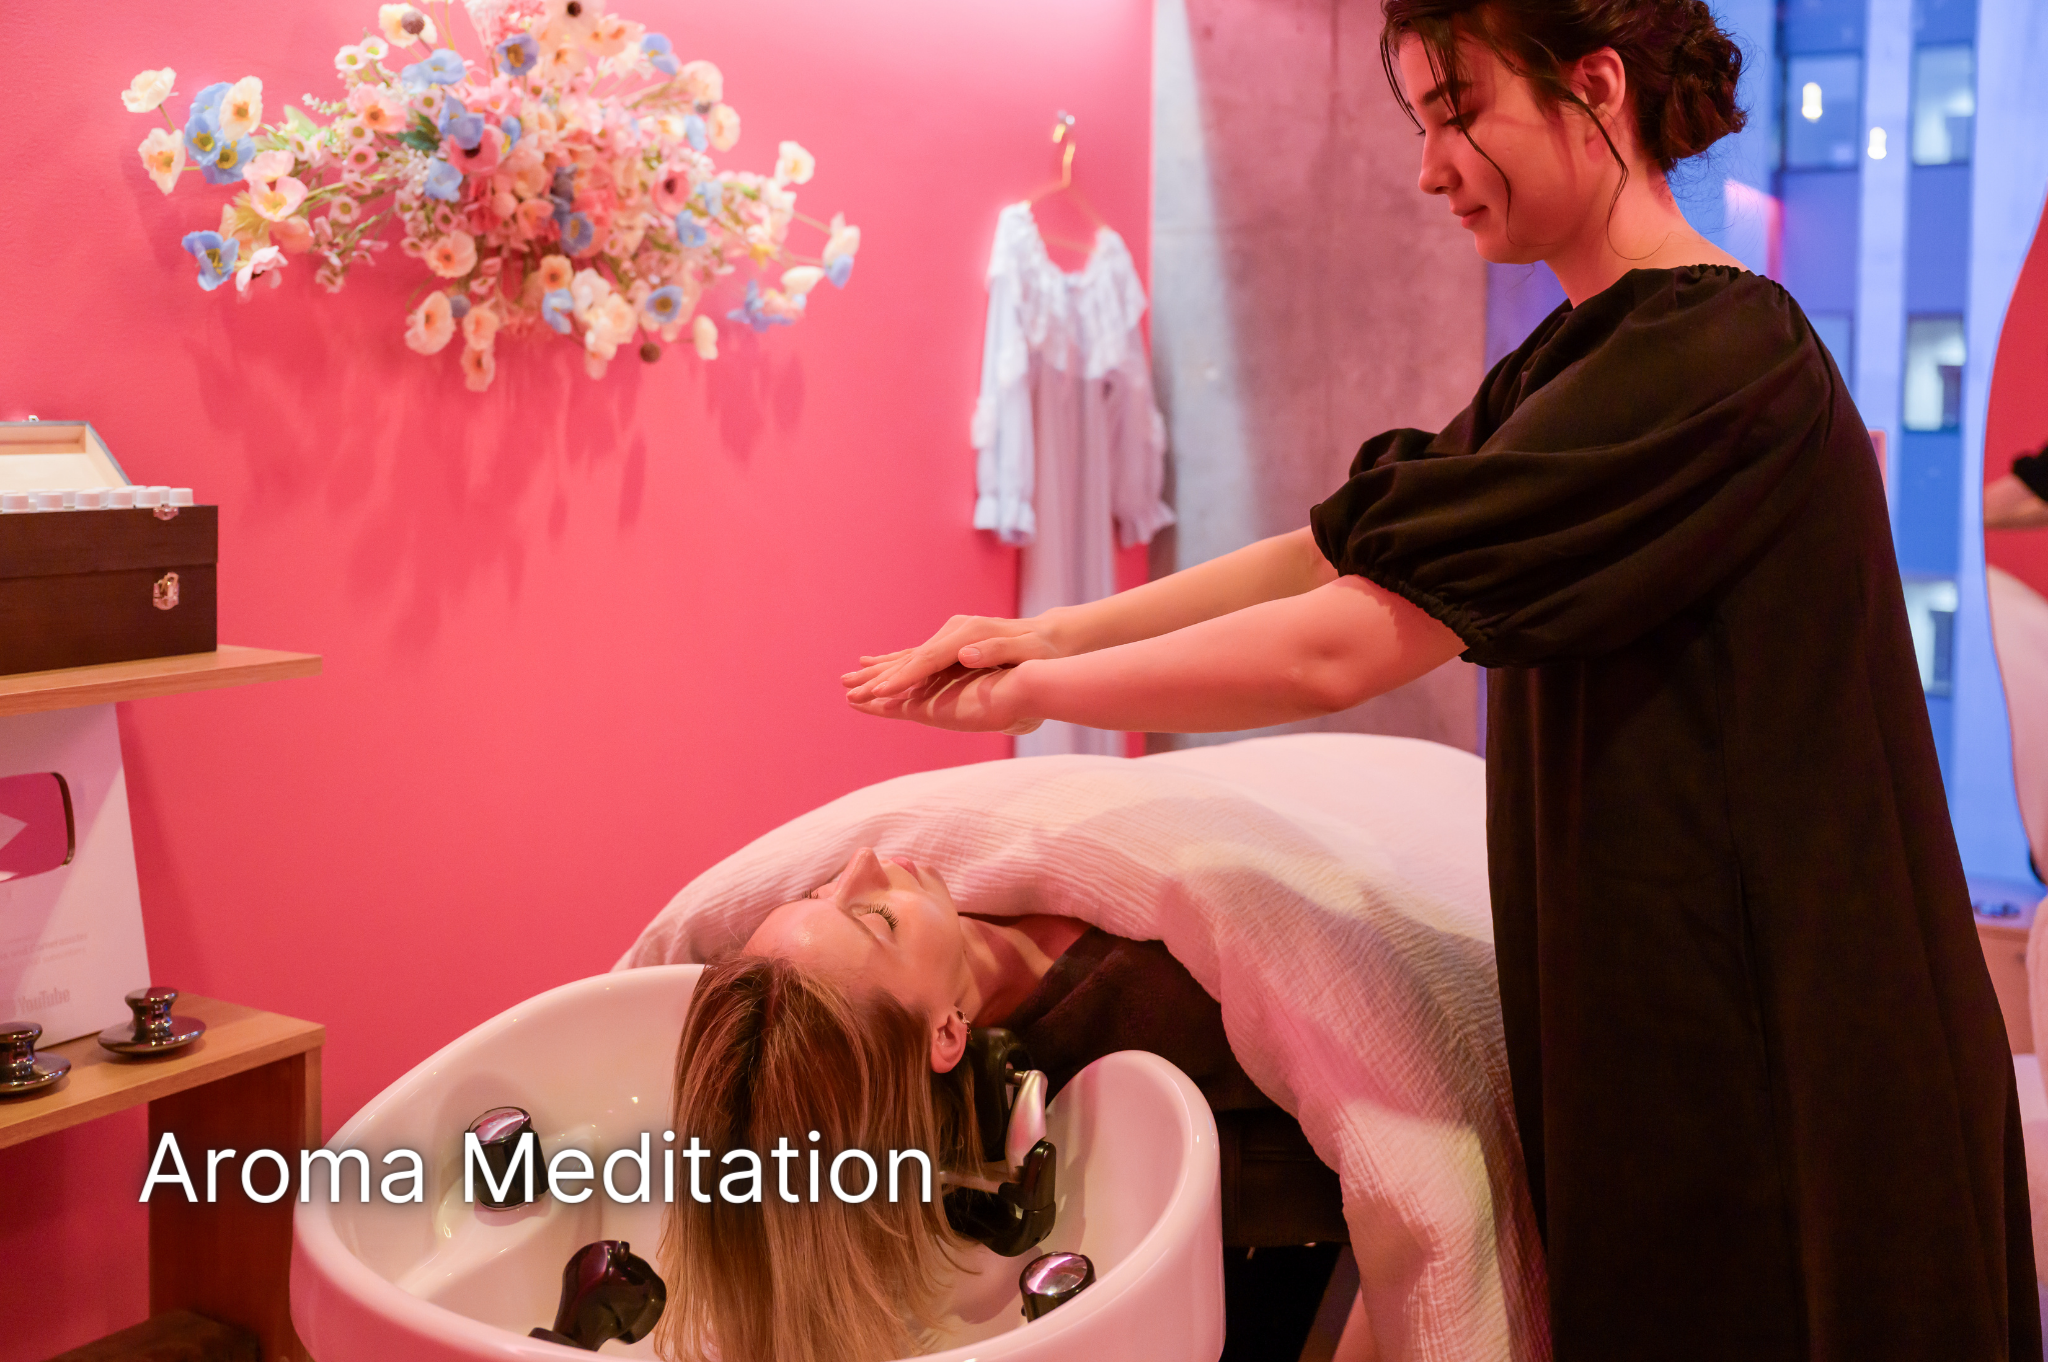 2HOURS of PURE JAPANESE HEAD SPA in ICONIC PINK ROOM